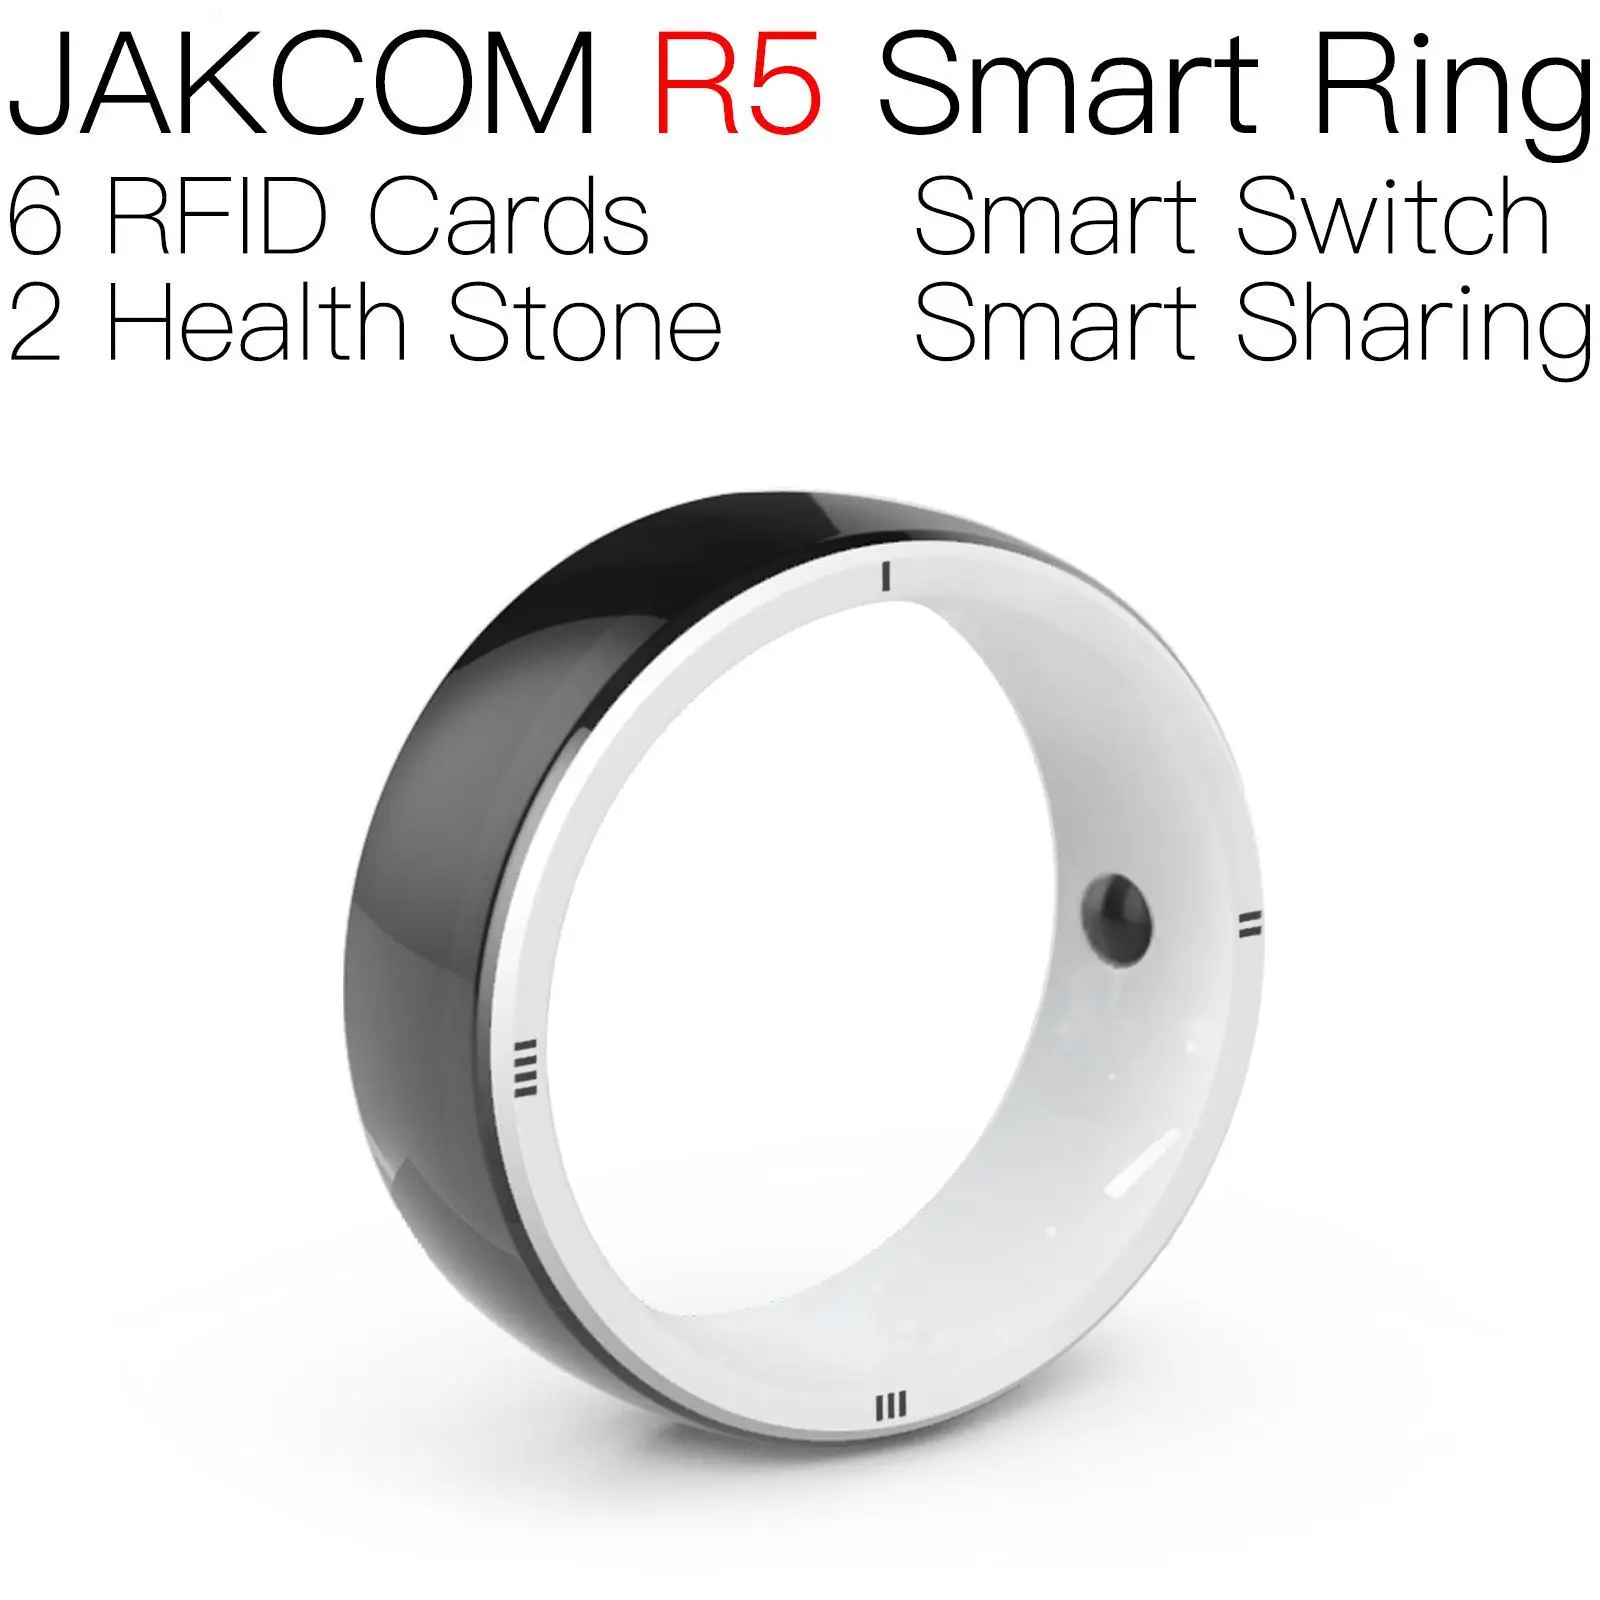 

JAKCOM R5 Smart Ring Newer than coil s50 badge rfid uid android mct wallet long range uhf reader chip pets tags nfc card read